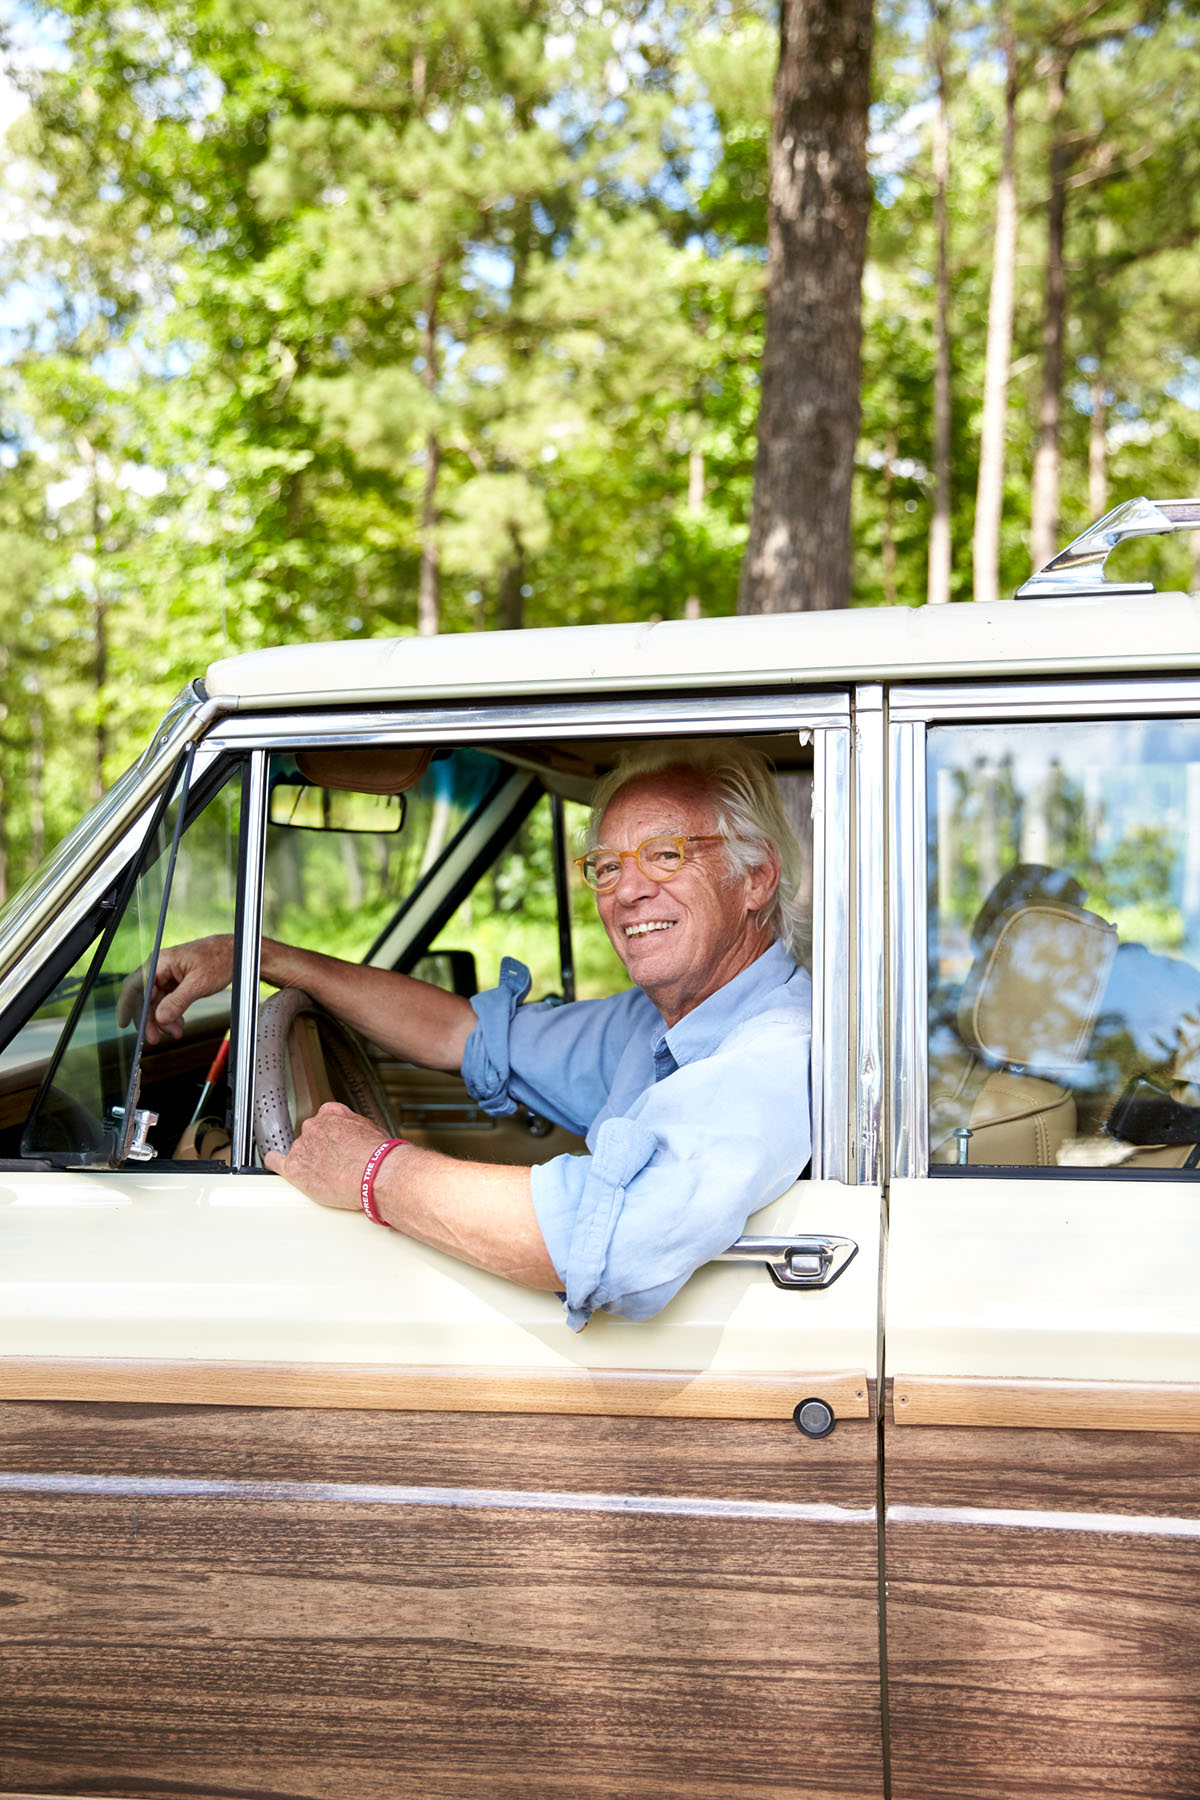 Gates Shaw, wearing a pale blue button up with the sleeves rolled up, smiles from the drivers seat of a vintage wood-panel car